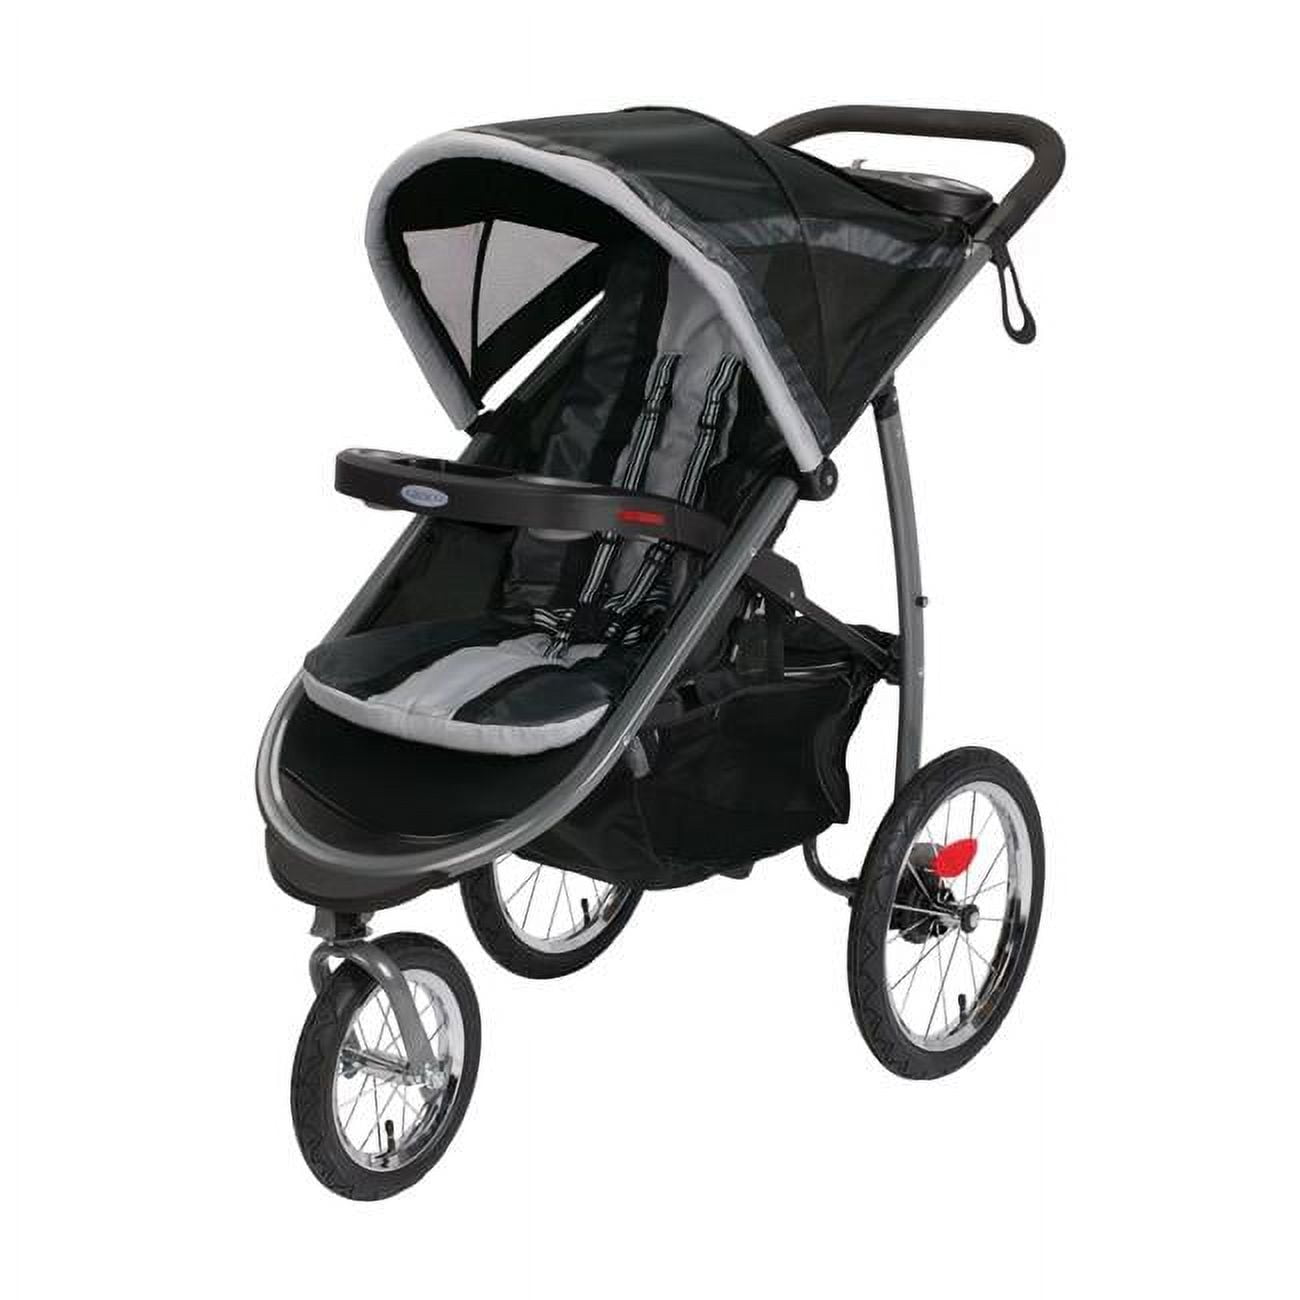 Graco Strollers: FastAction Fold Jogger $99 or Modes Adventure Wagon $199 + Free Shipping